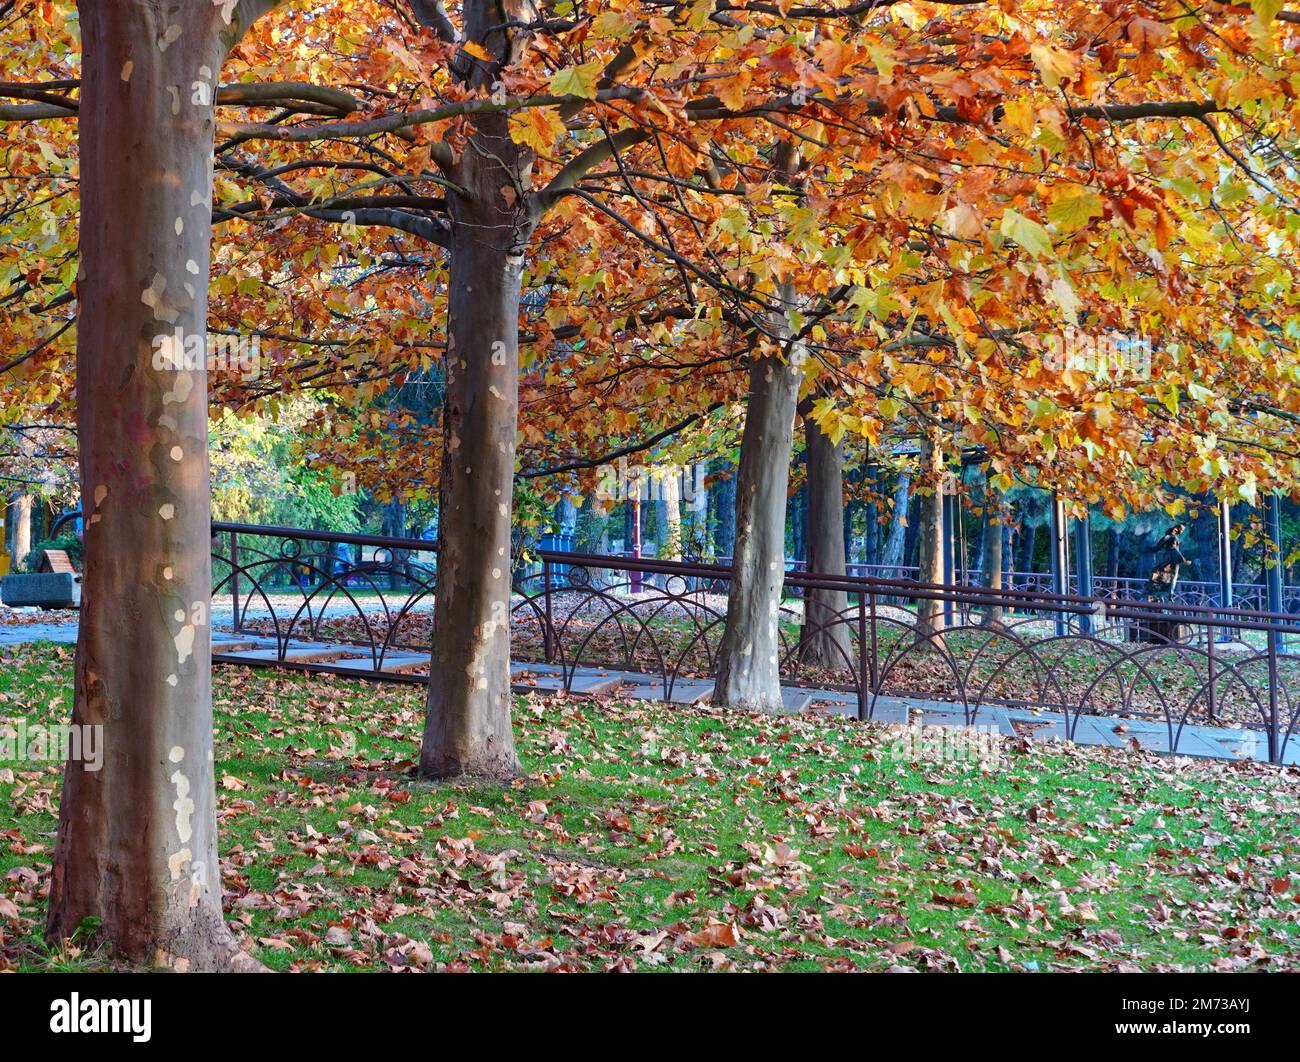 Autumn natural landscape in Titan park in Bucharest, with row of platanus trees with yellow leaves, sere fallen leaves and stairs with handrail Stock Photo